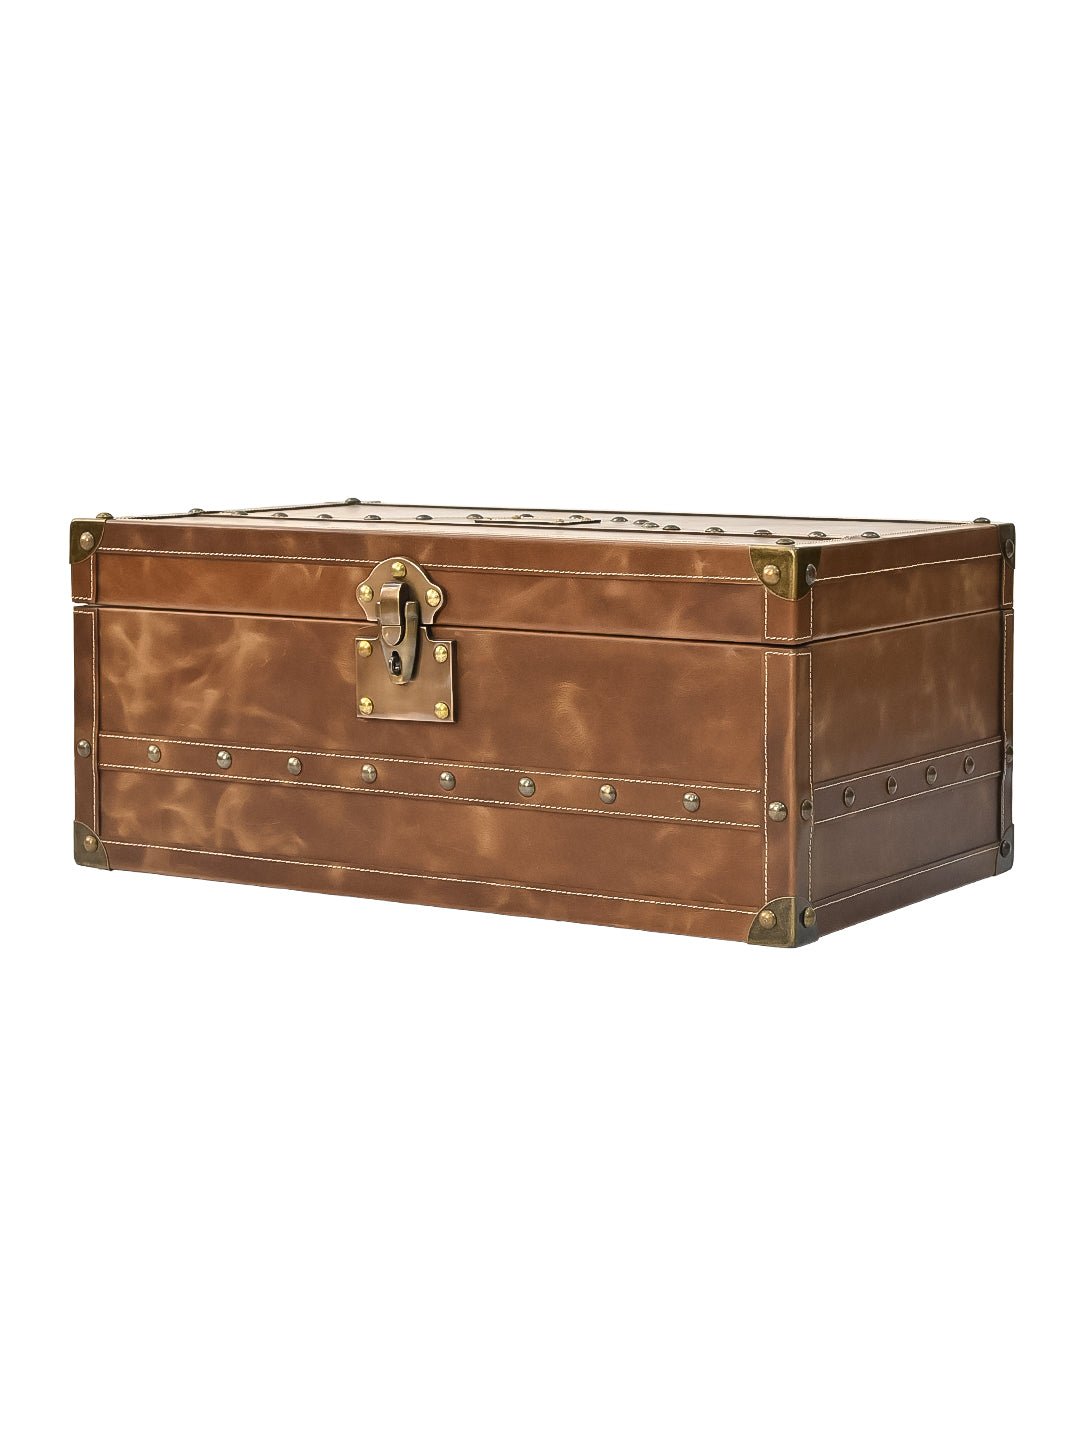 CORAL - LEATHER TRUNK - ART AVENUE